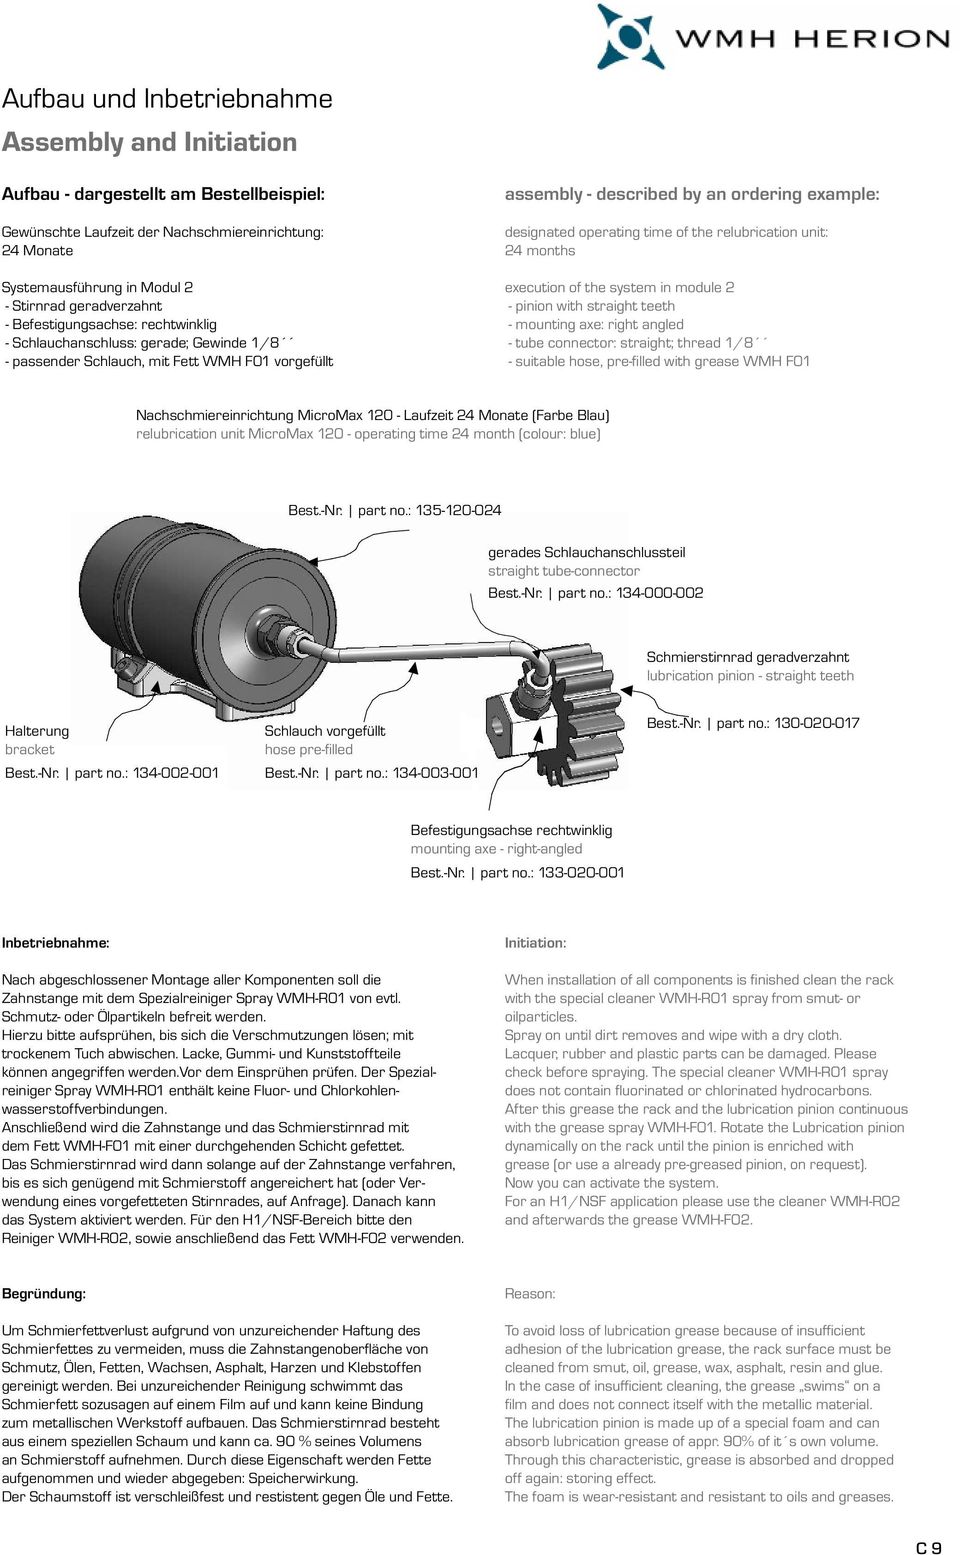 operating time of the relubrication unit: 24 months execution of the system in module 2 - pinion with straight teeth - mounting axe: right angled - tube connector: straight; thread 1/8 - suitable